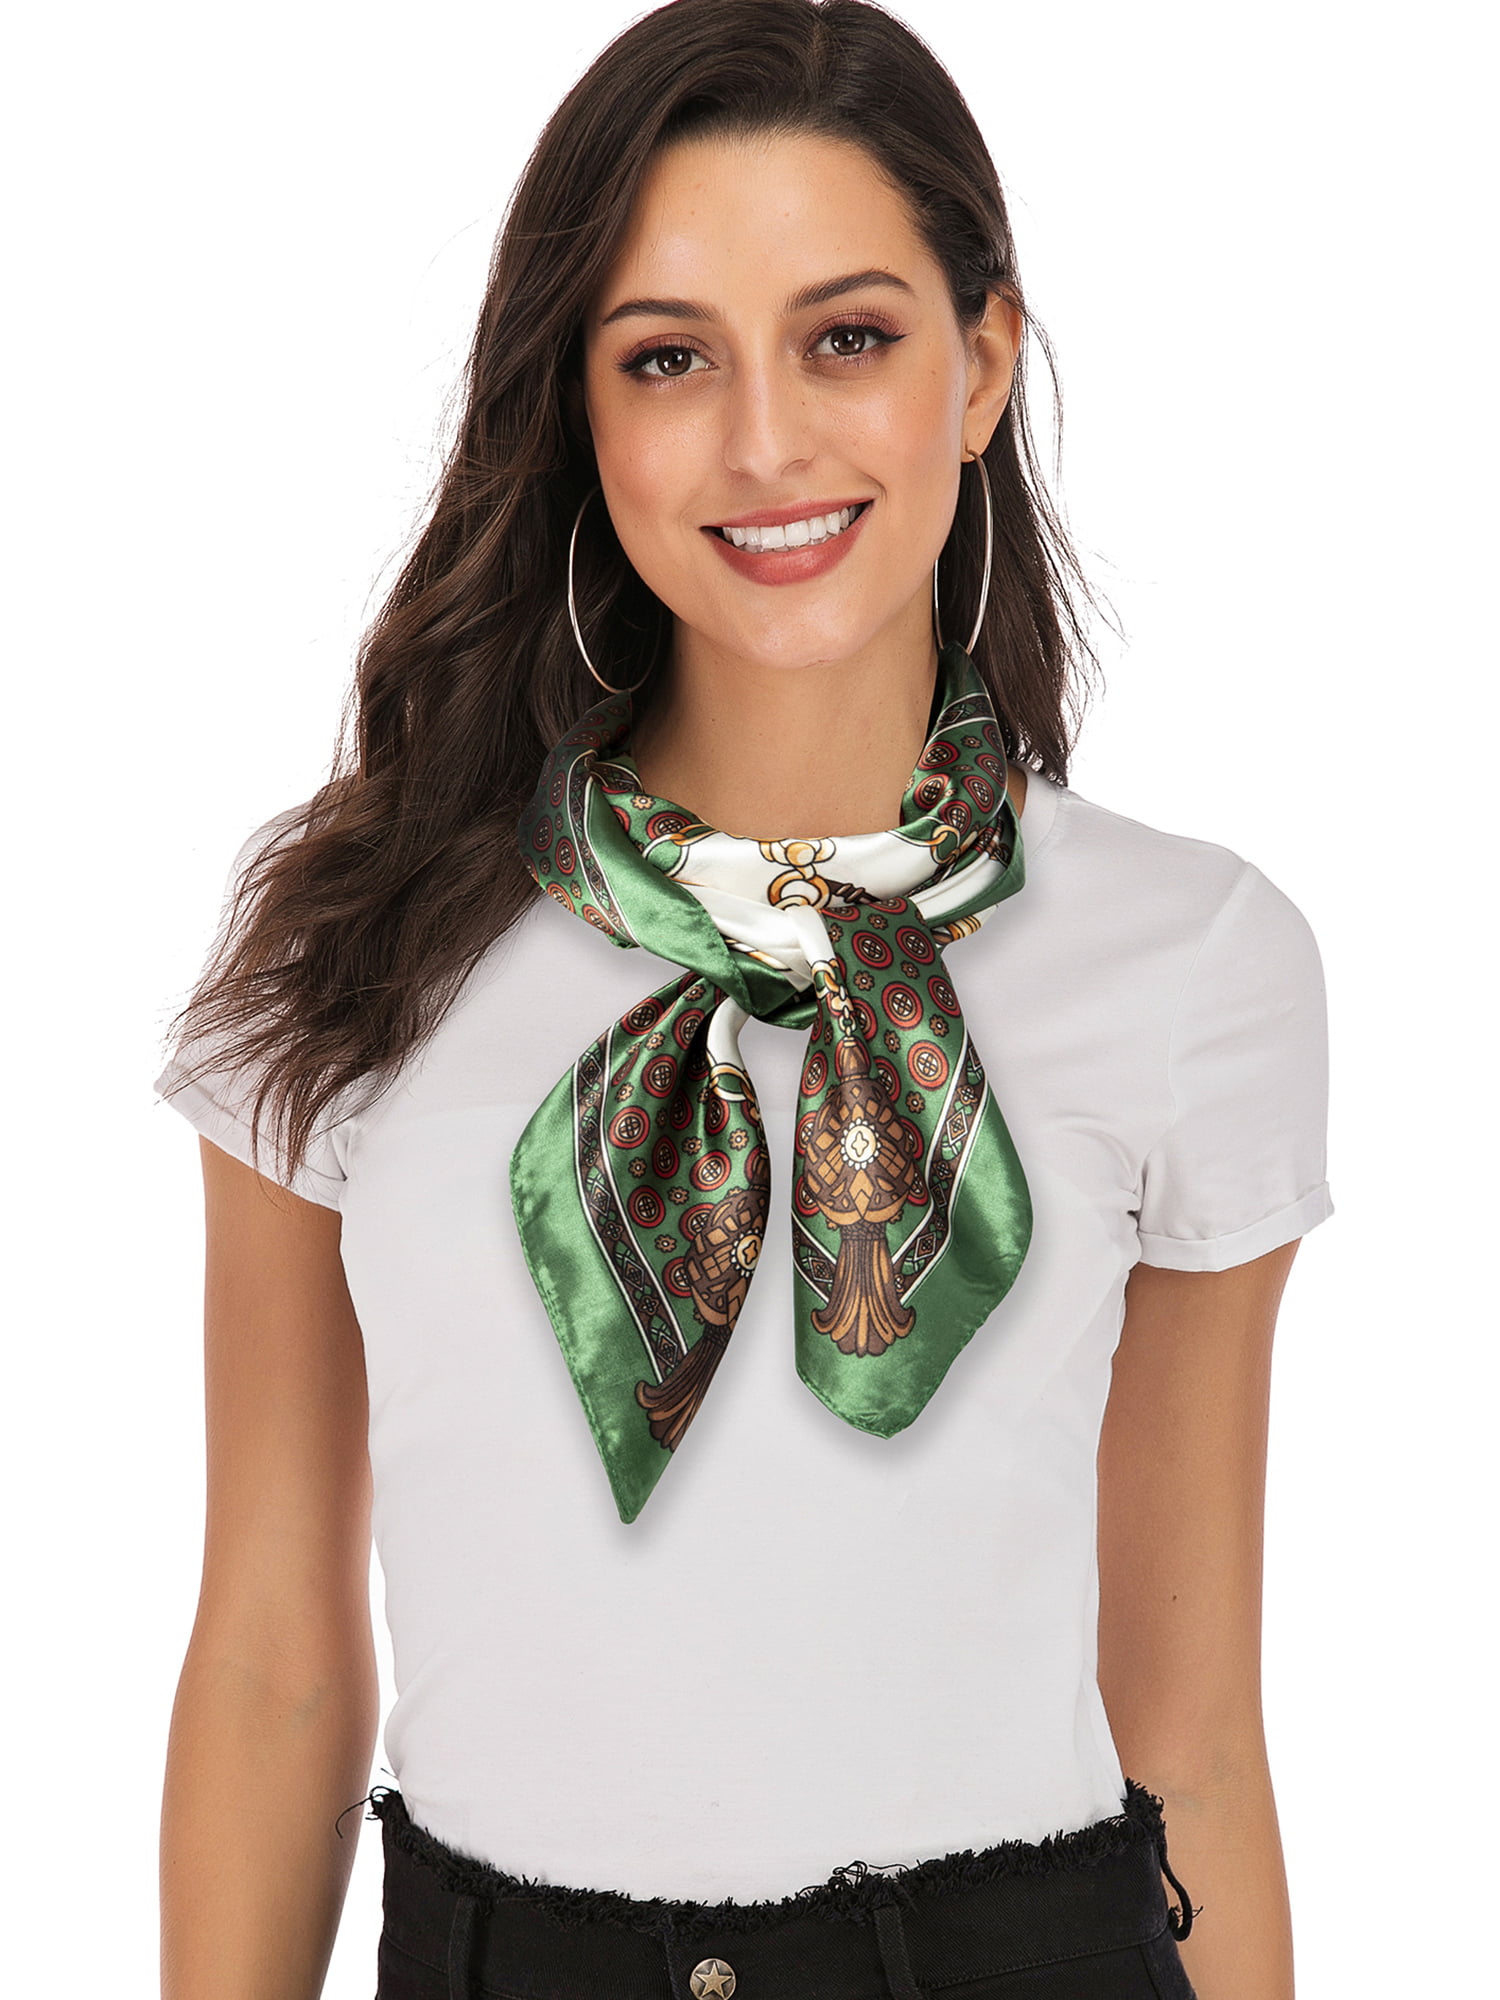 Zac's Alter Ego® 3 in 1 Patterned Sash Scarf/ Head Scarf/ Neck Scarf 